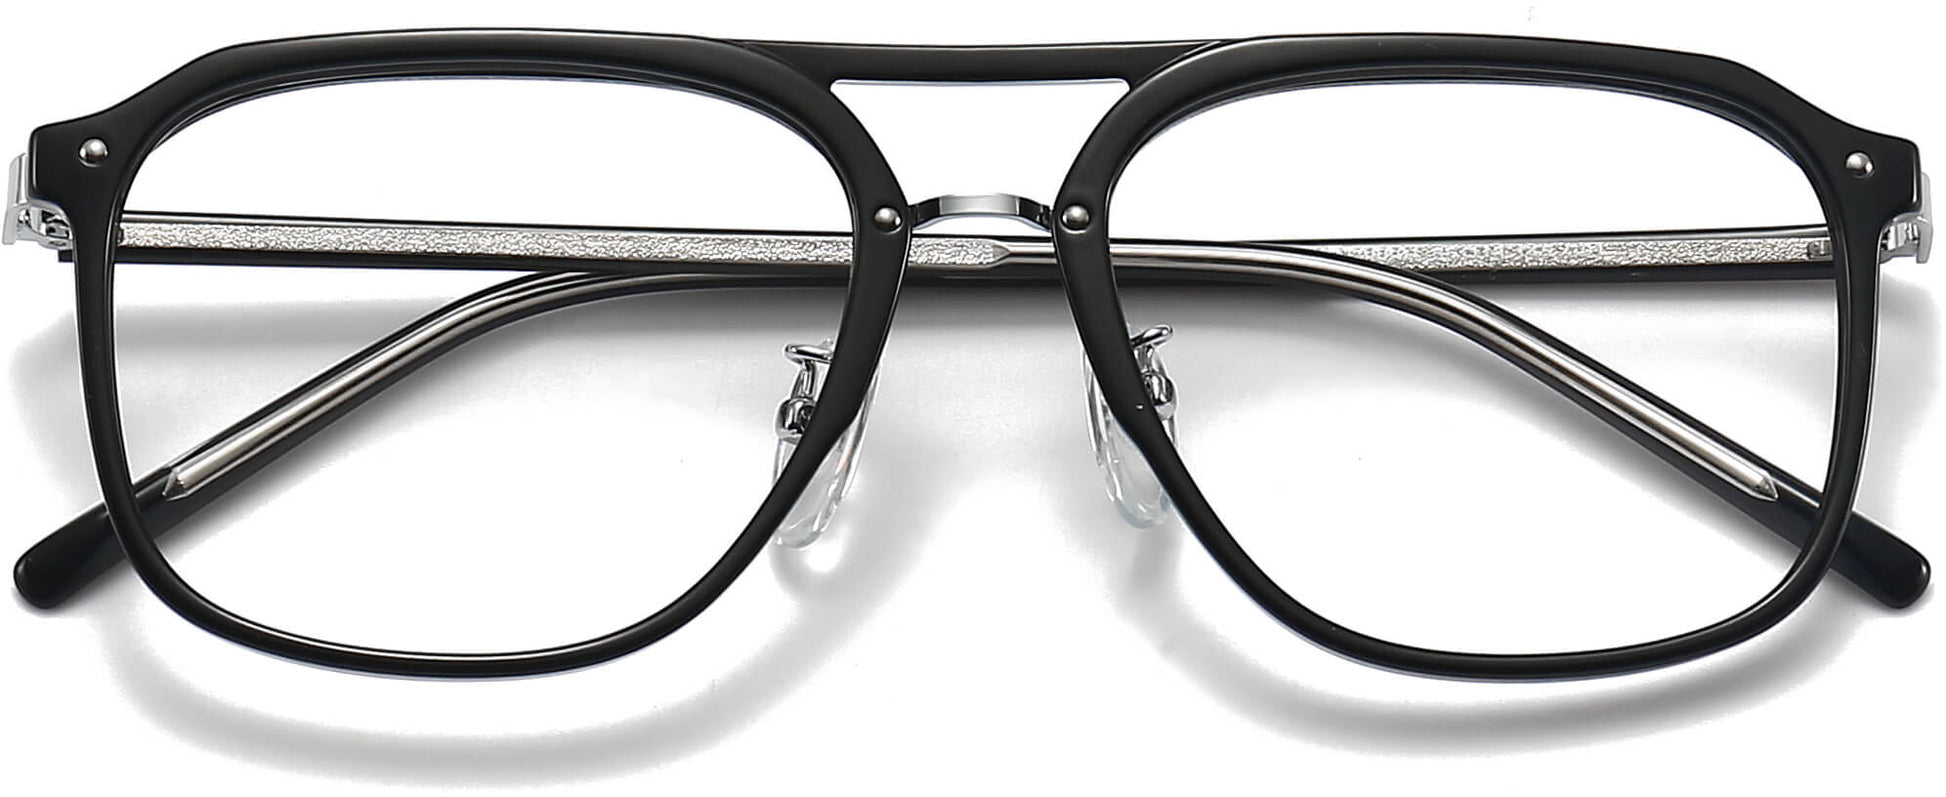 Wells Square Black Eyeglasses from ANRRI, closed view